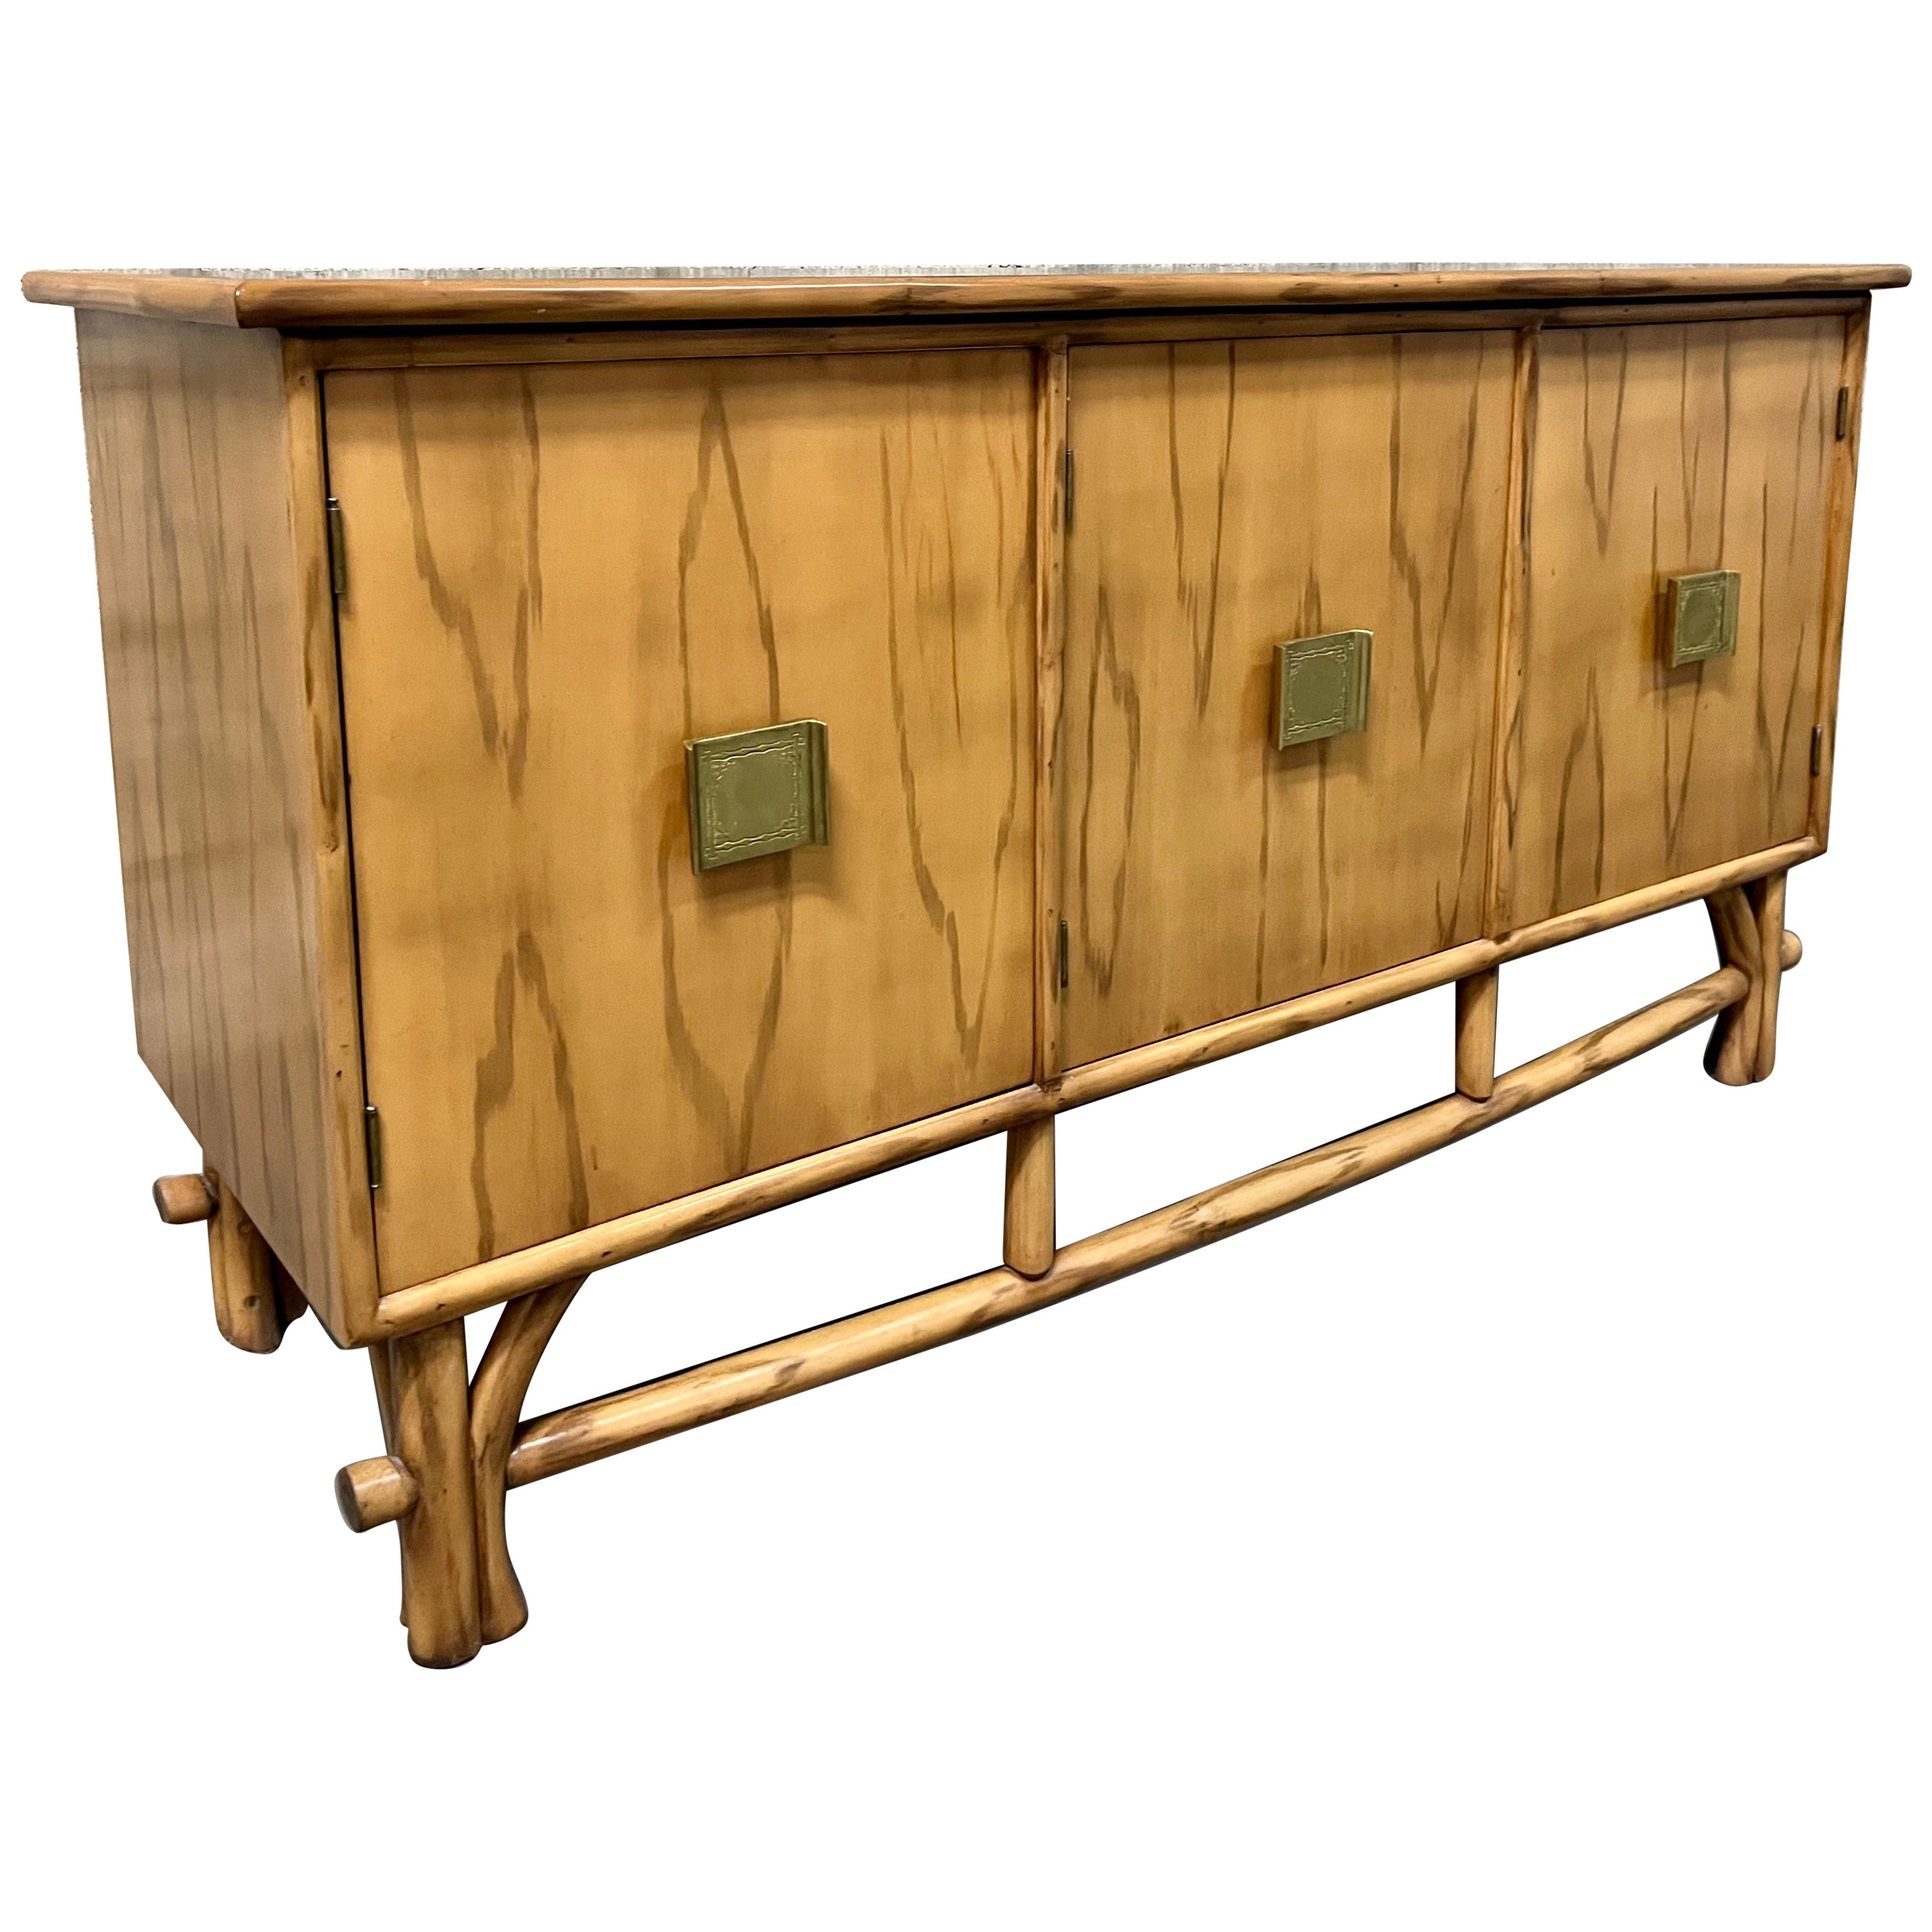 1960s Chinoiserie Inspired Sideboard in the Adrien Audoux & Frida Minet Style For Sale